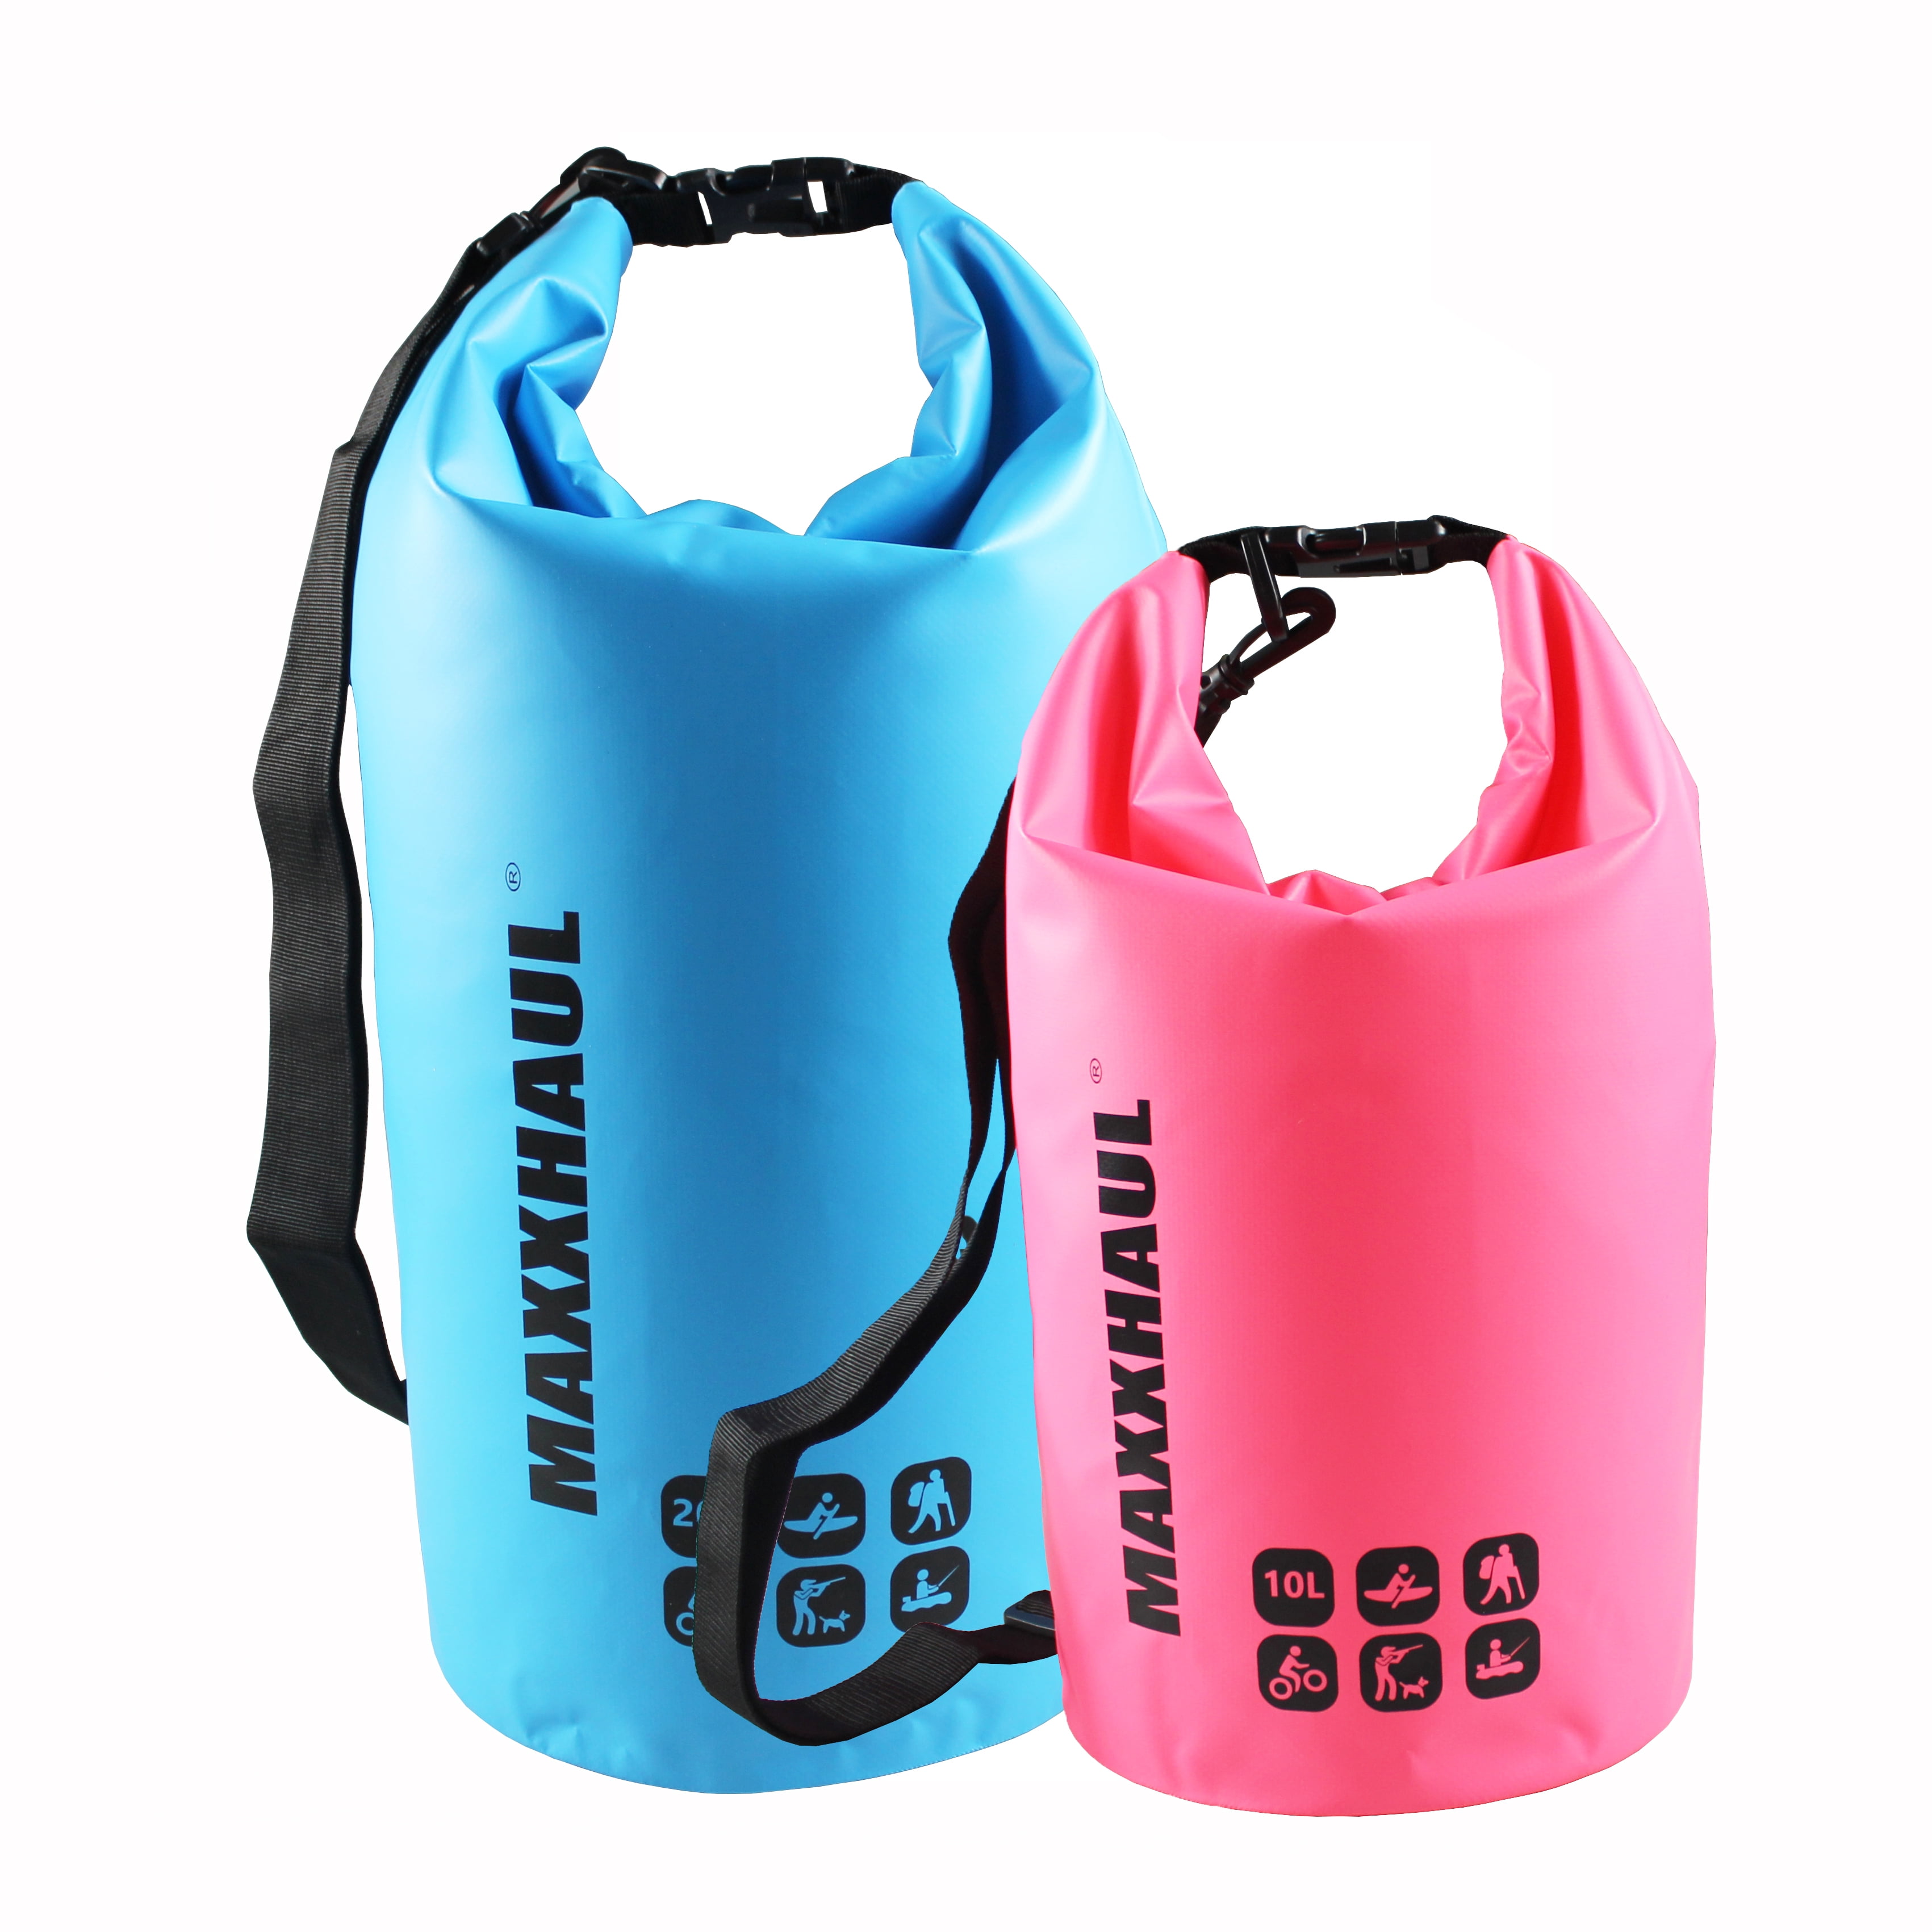 Dlight Outdoor Lightweight Waterproof Dry Bag Keeps Stuff Dry for Camping,Swimming,Kayaking,Boating,Hiking,Adjustable Shoulder Strap Included 10L/20L/30L Roll Top Floating Dry Sack